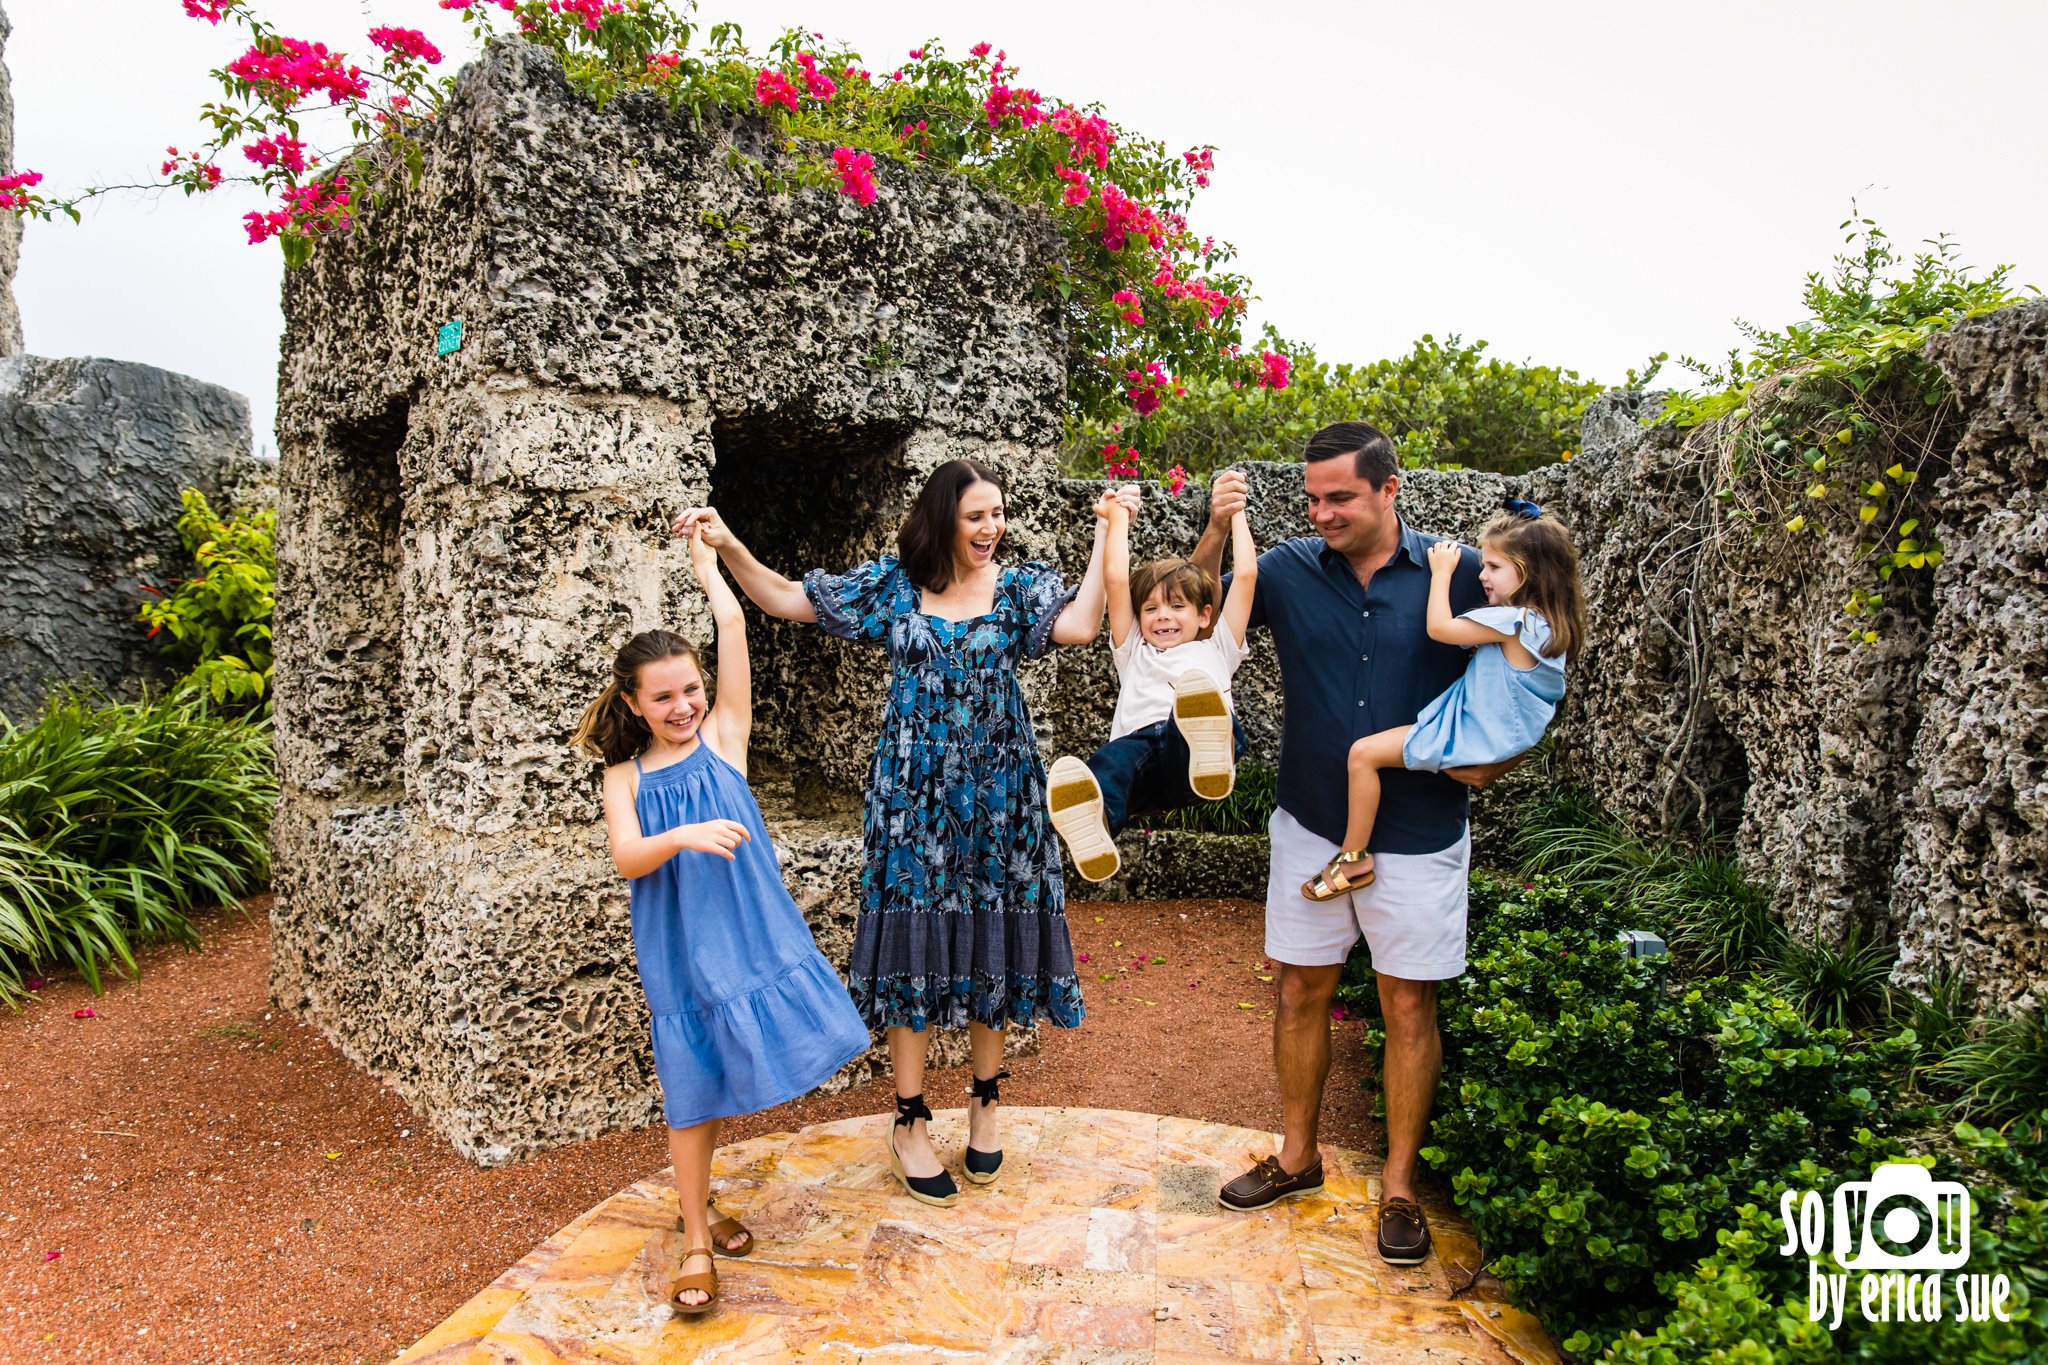 4-lifestyle-family-photographer-coral-castle-miami-fl-so-you-by-erica-sue-ES2_8828.jpg